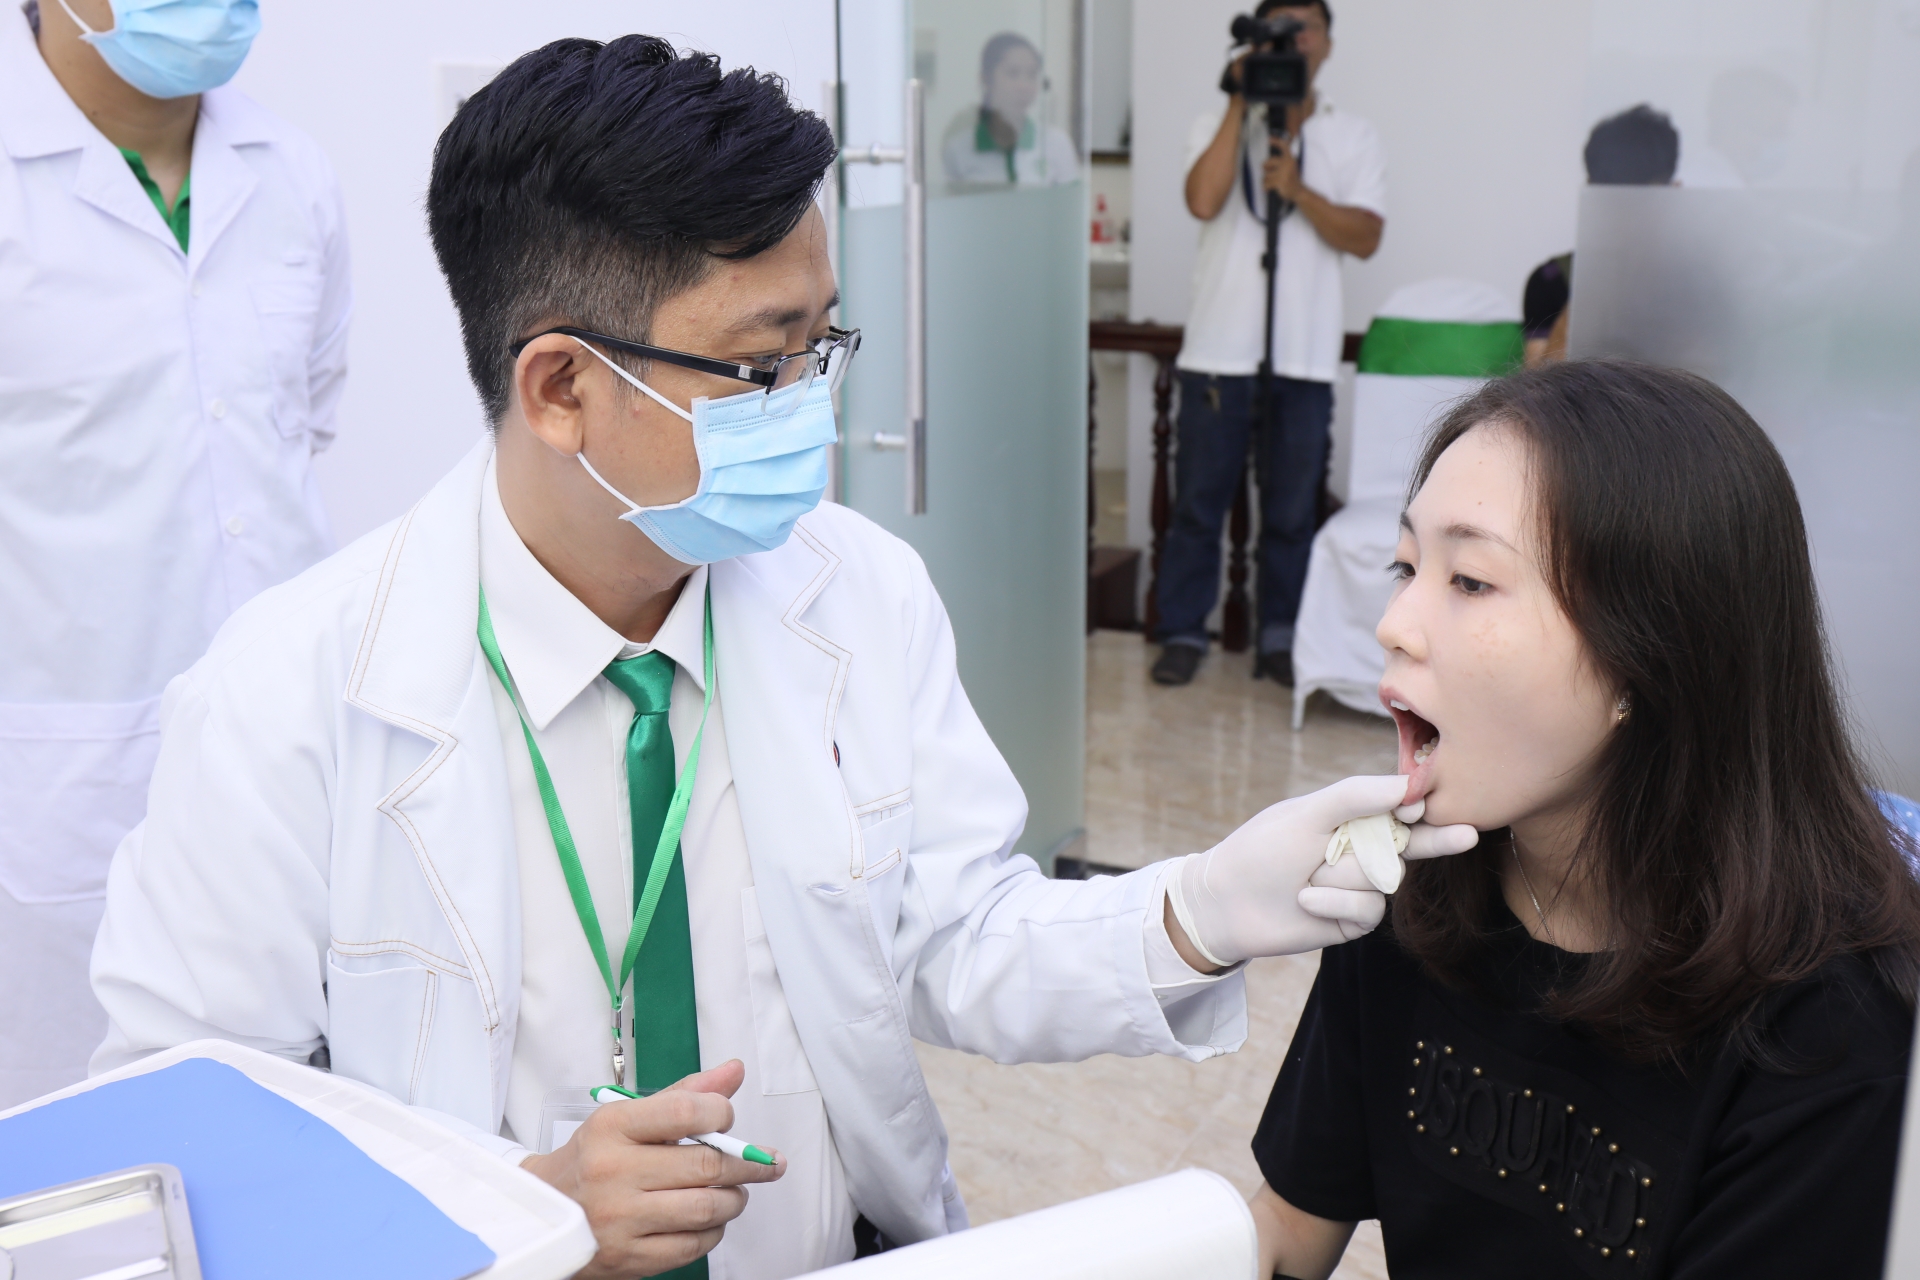 Vietnam's dental industry is expected to reach a revenue of $435 million by 2023